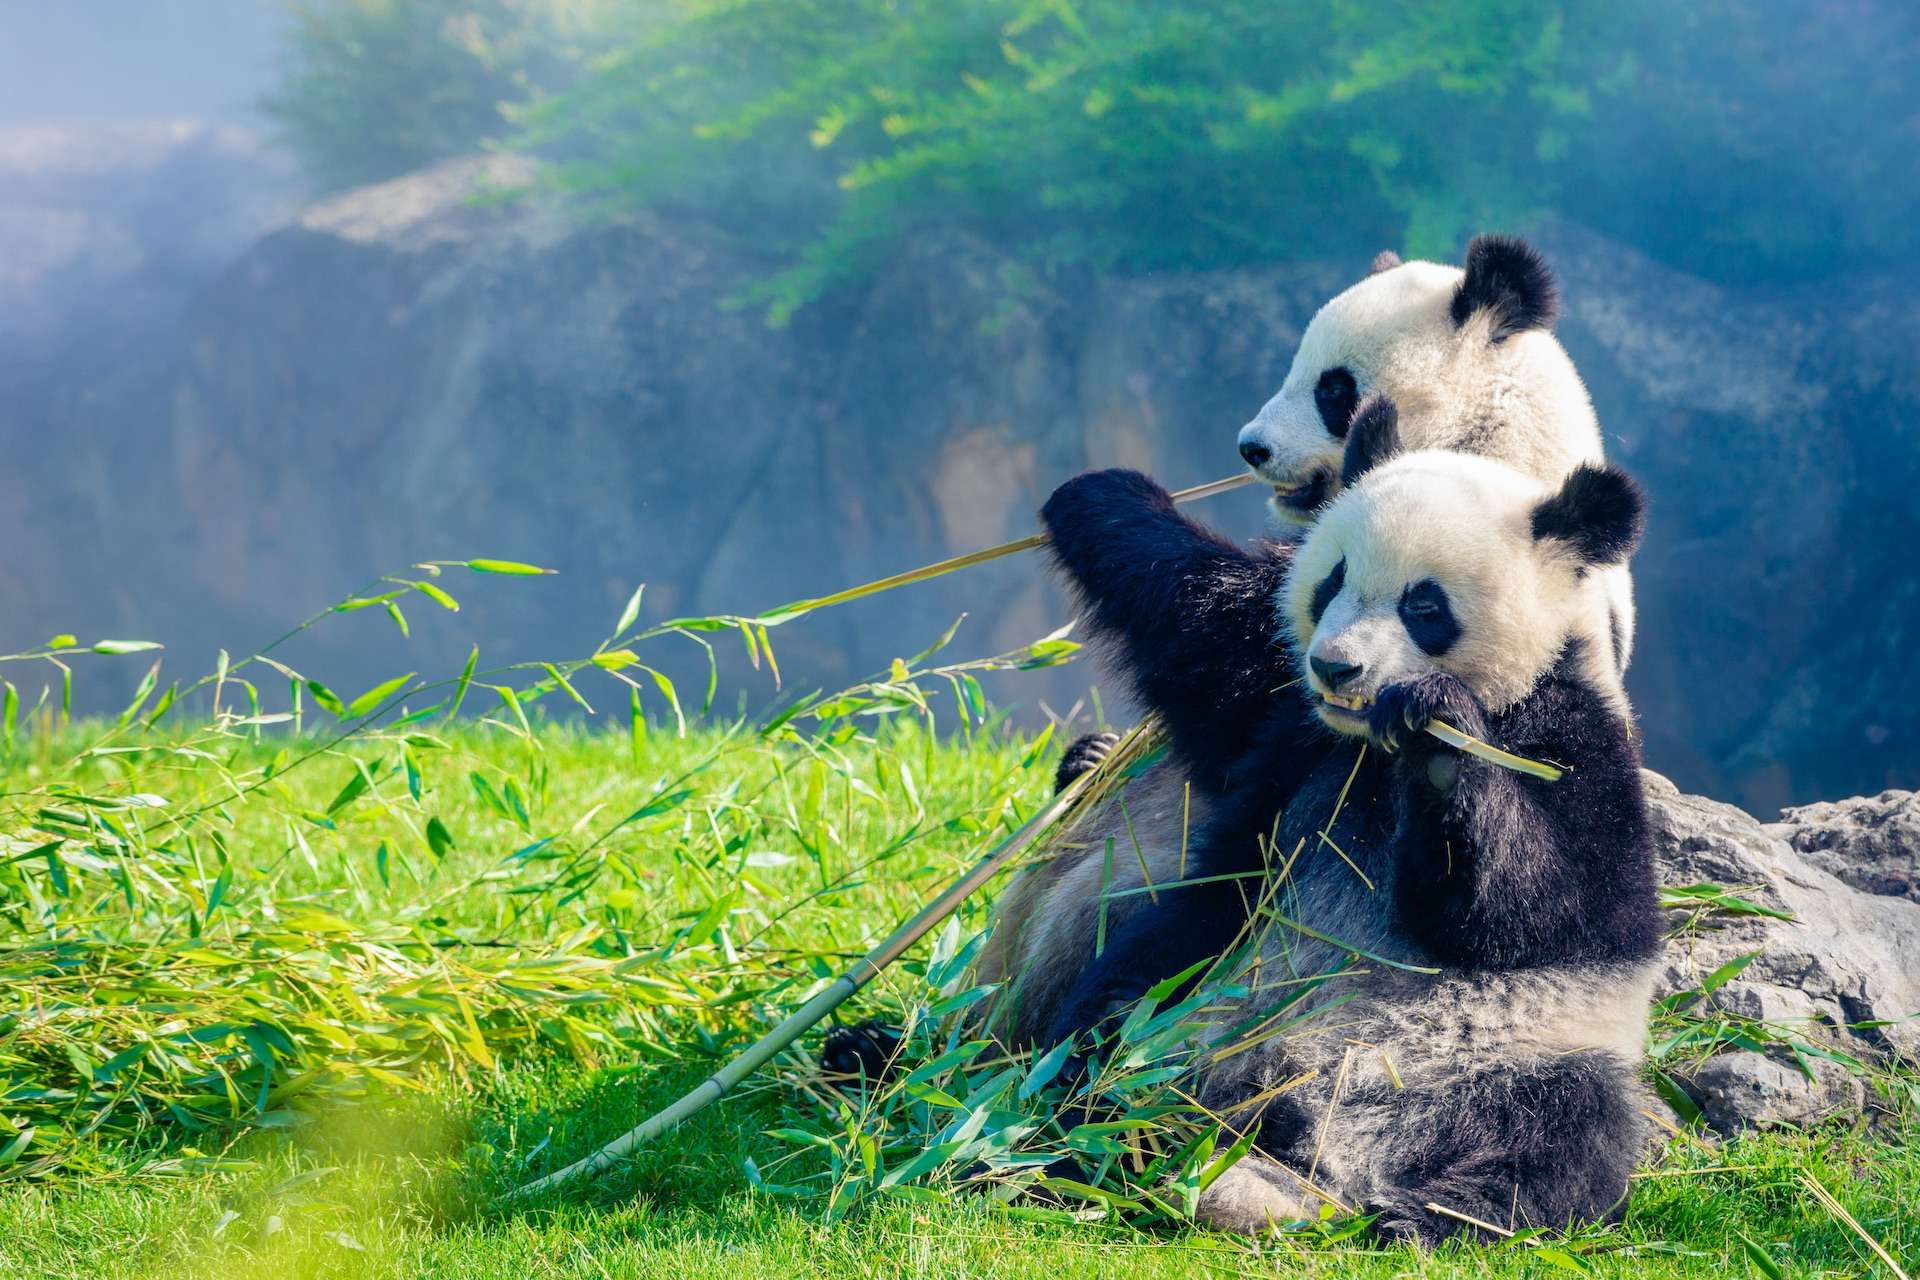 Mother Panda and her baby Panda are Snuggling and eating bamboo in the morning, in a zoo in France